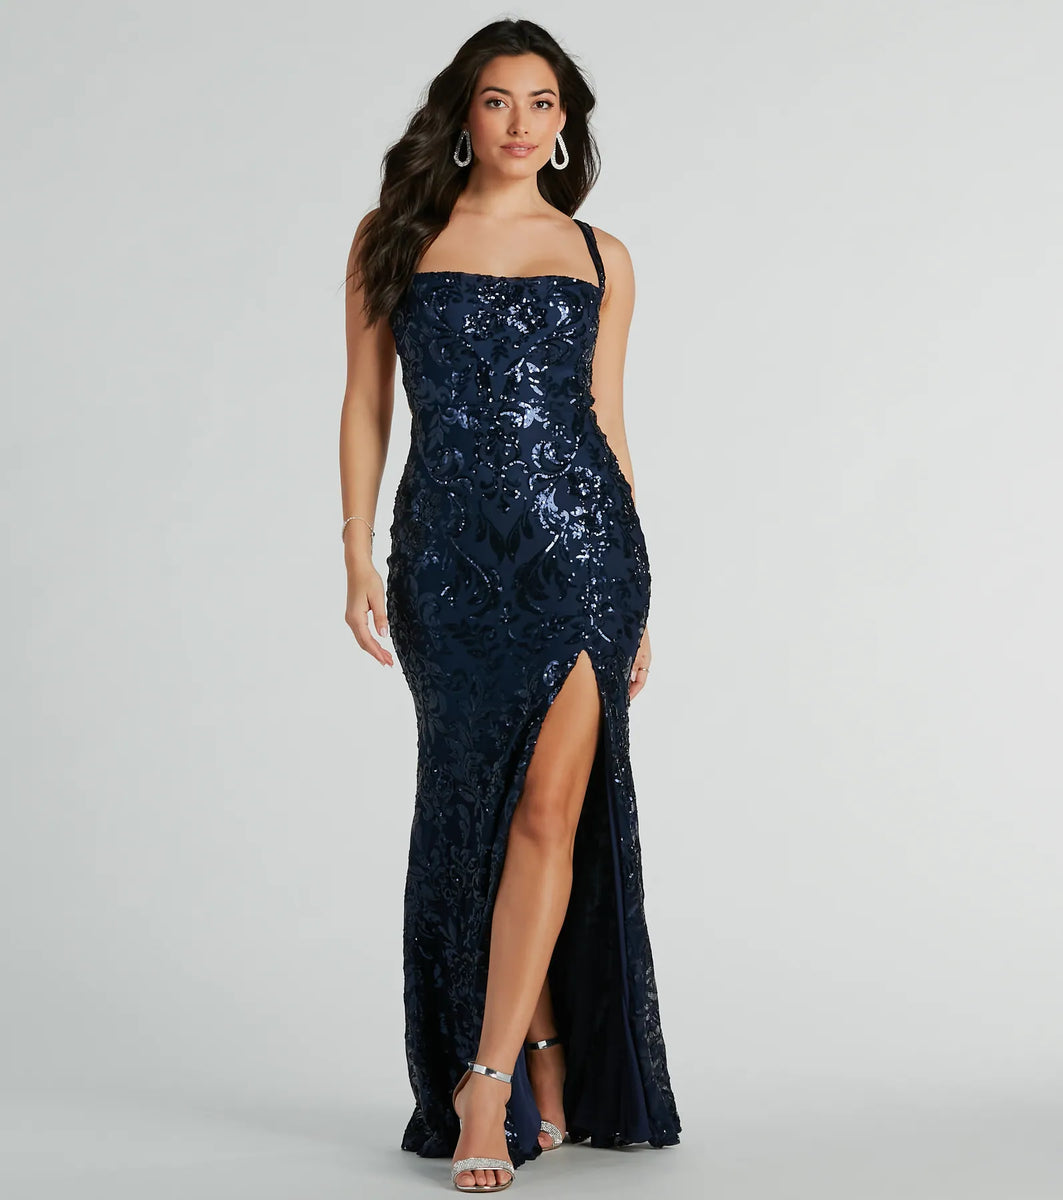 Moira Lace-Up Mermaid Sequin Formal Dress